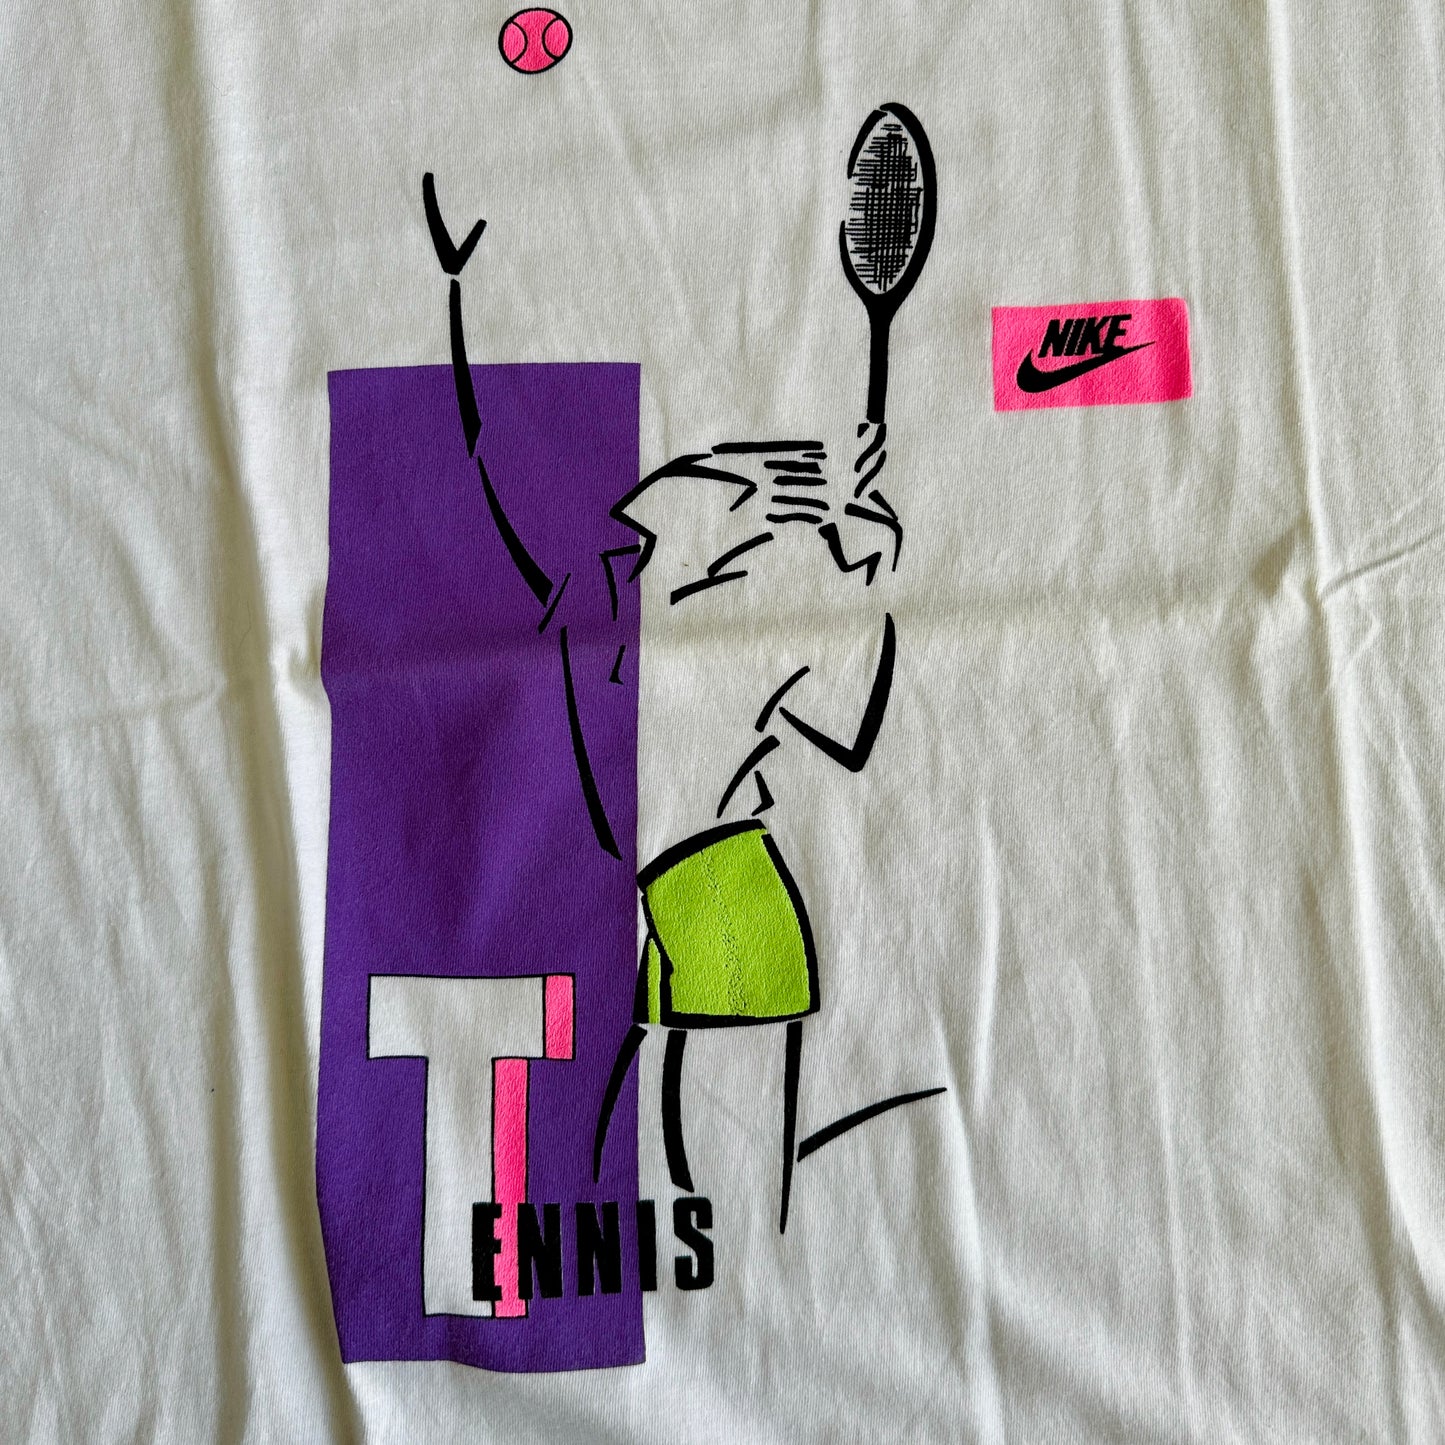 Nike 1989 Vintage Tennis Tournament T-Shirt - L - Made in Italy